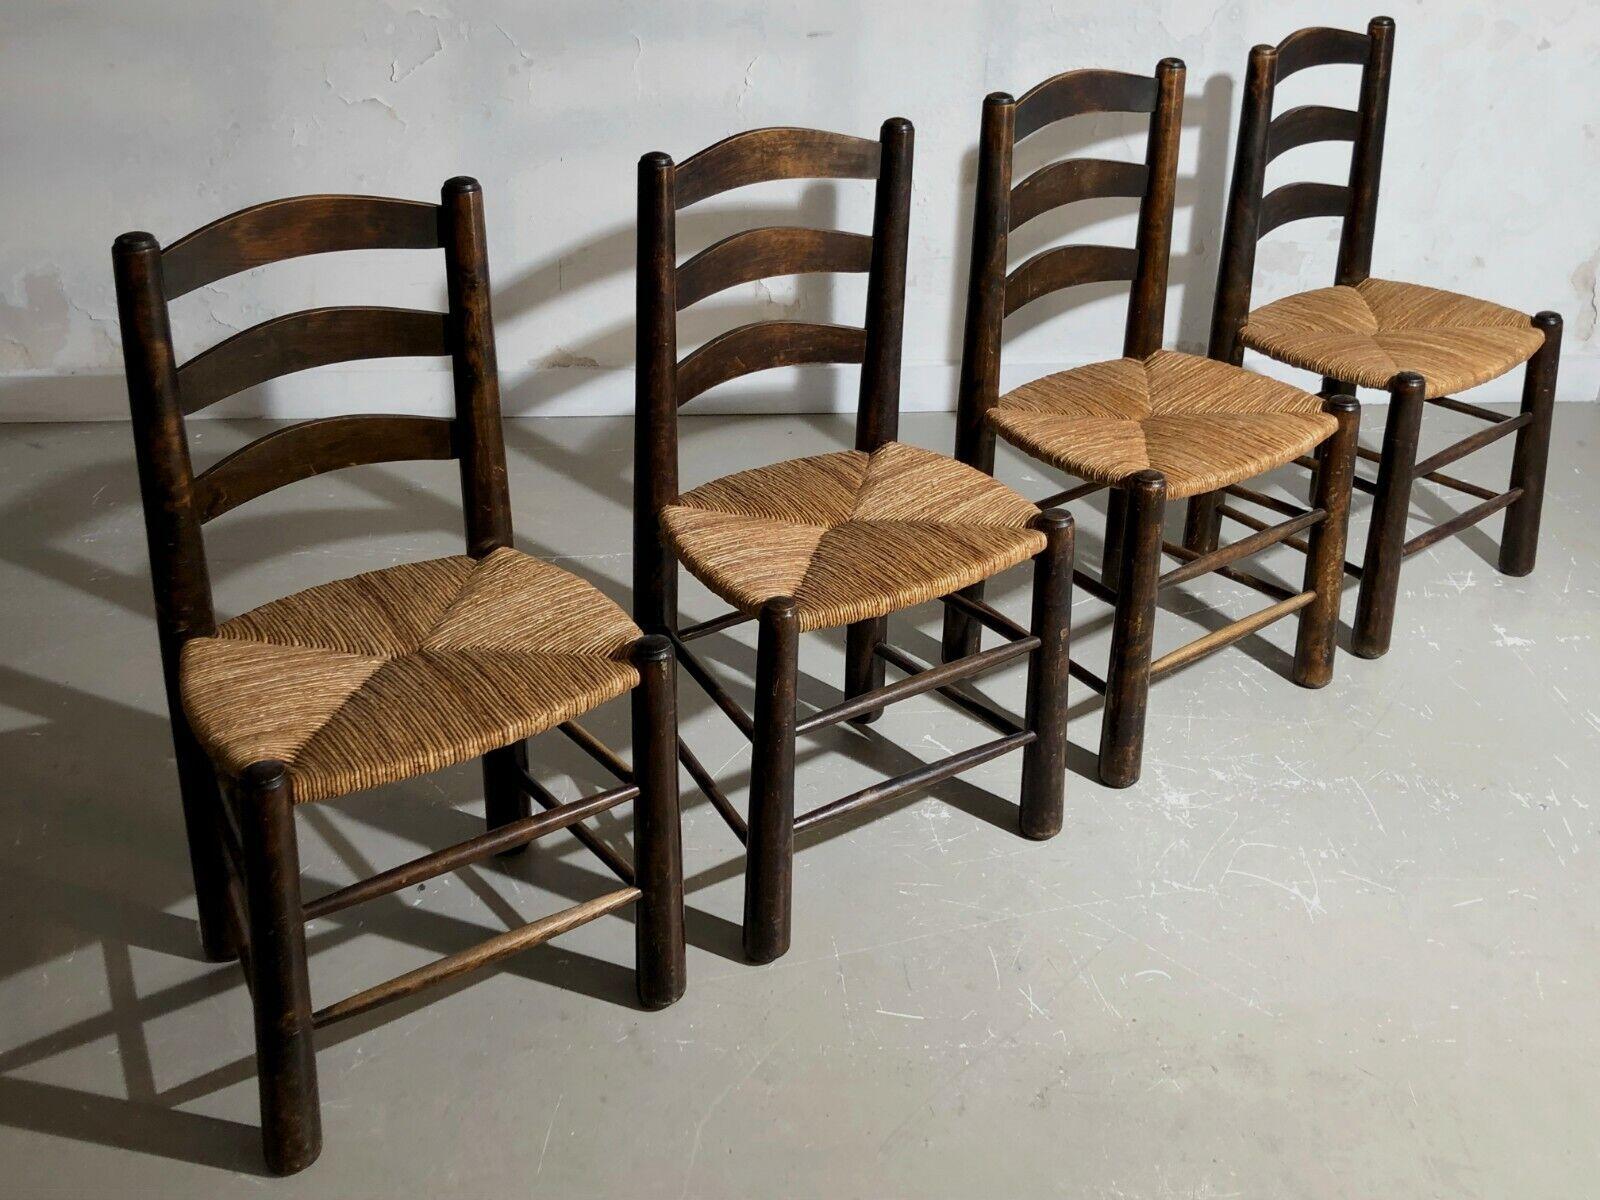 A Set of 4 BRUTALIST RUSTIC MODERN CHAIRS by GEORGES ROBERT, France 1960 For Sale 2